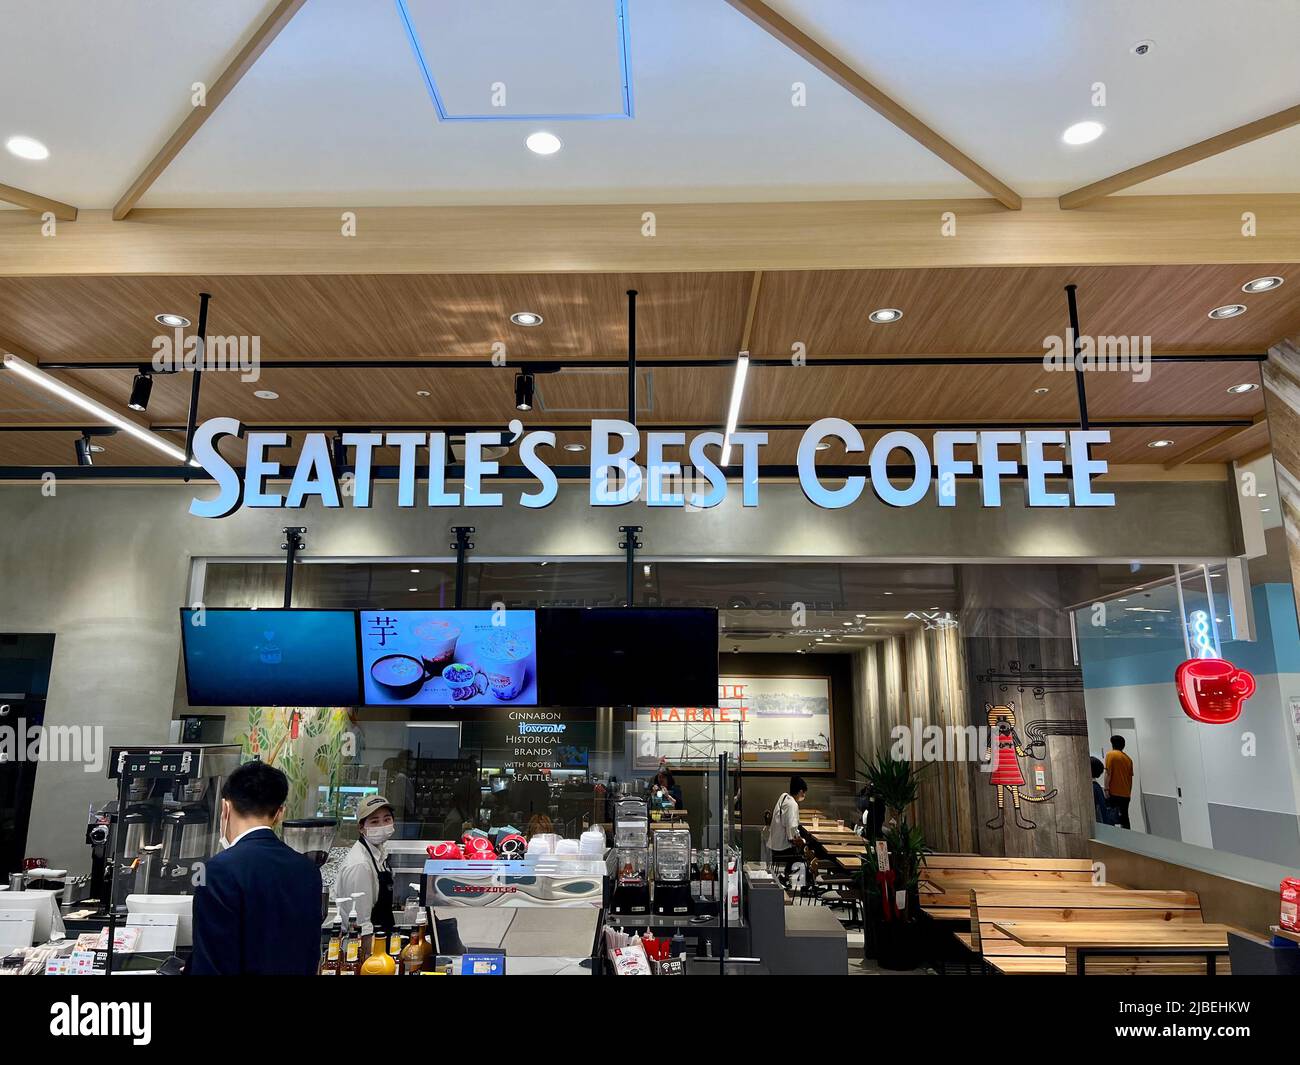 Seattle's Best Coffee Japan Storefront Stock Photo